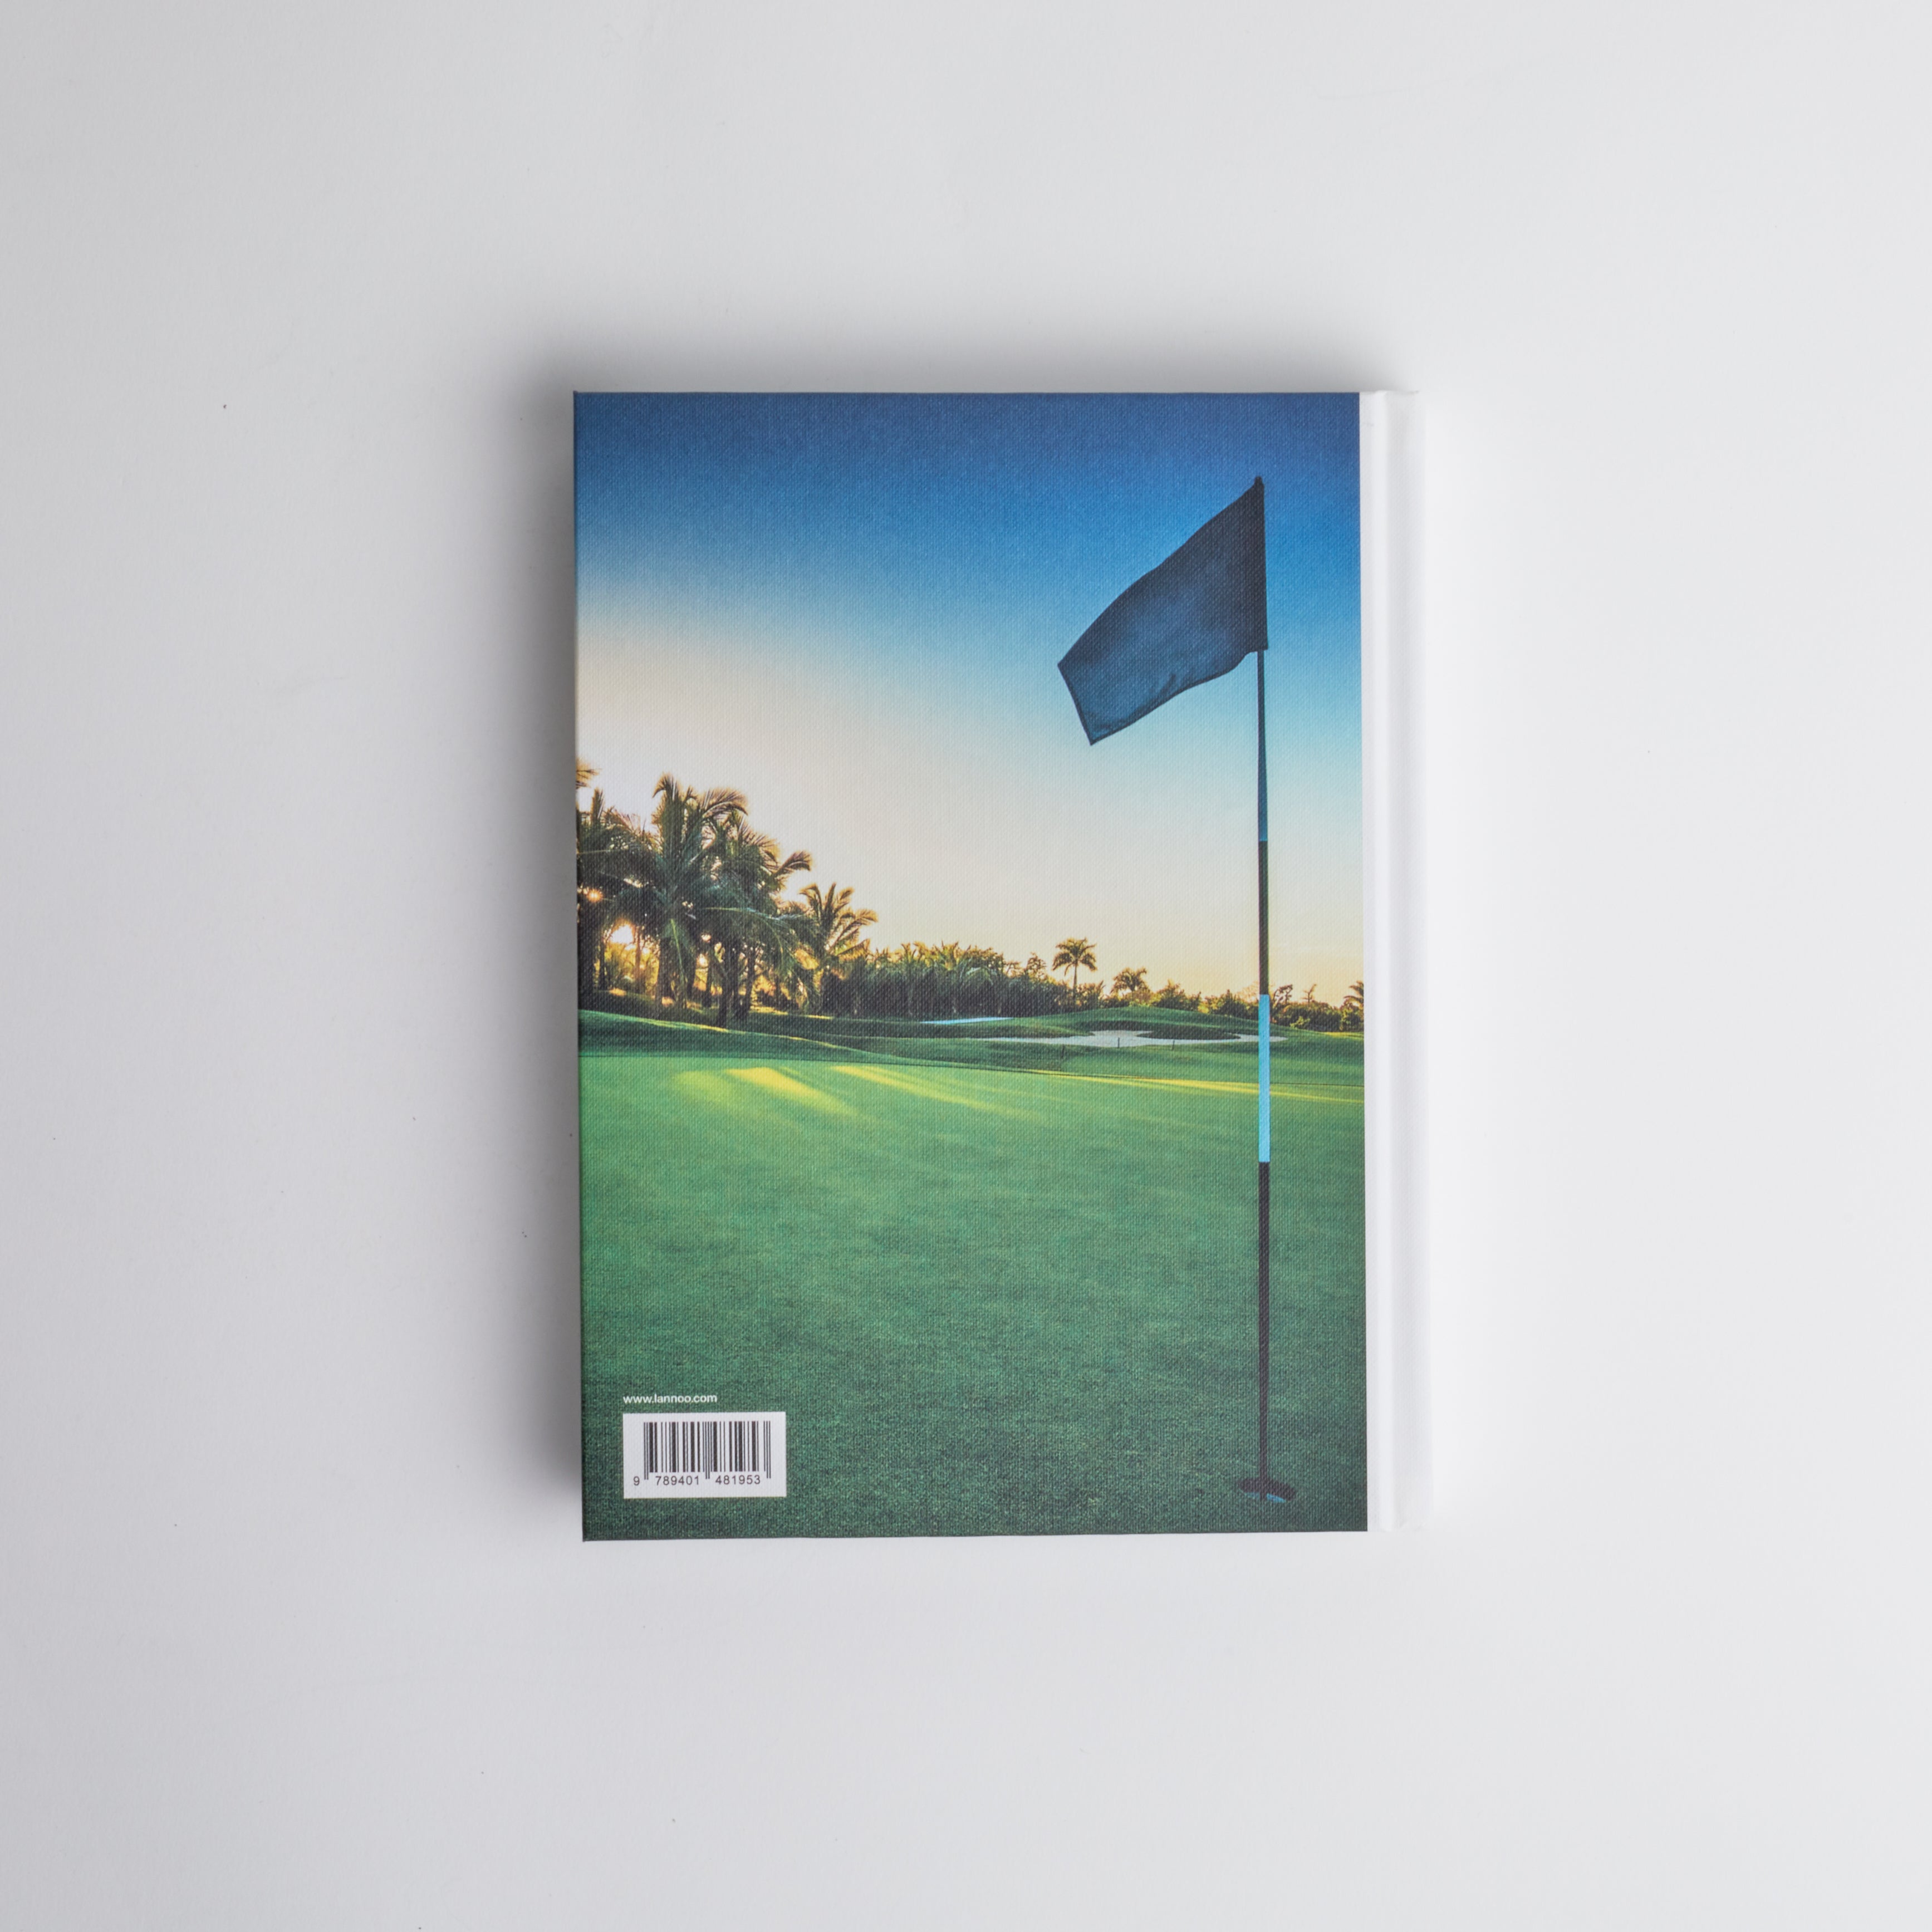 150 Golf Courses You Need to Visit Before You Die back cover